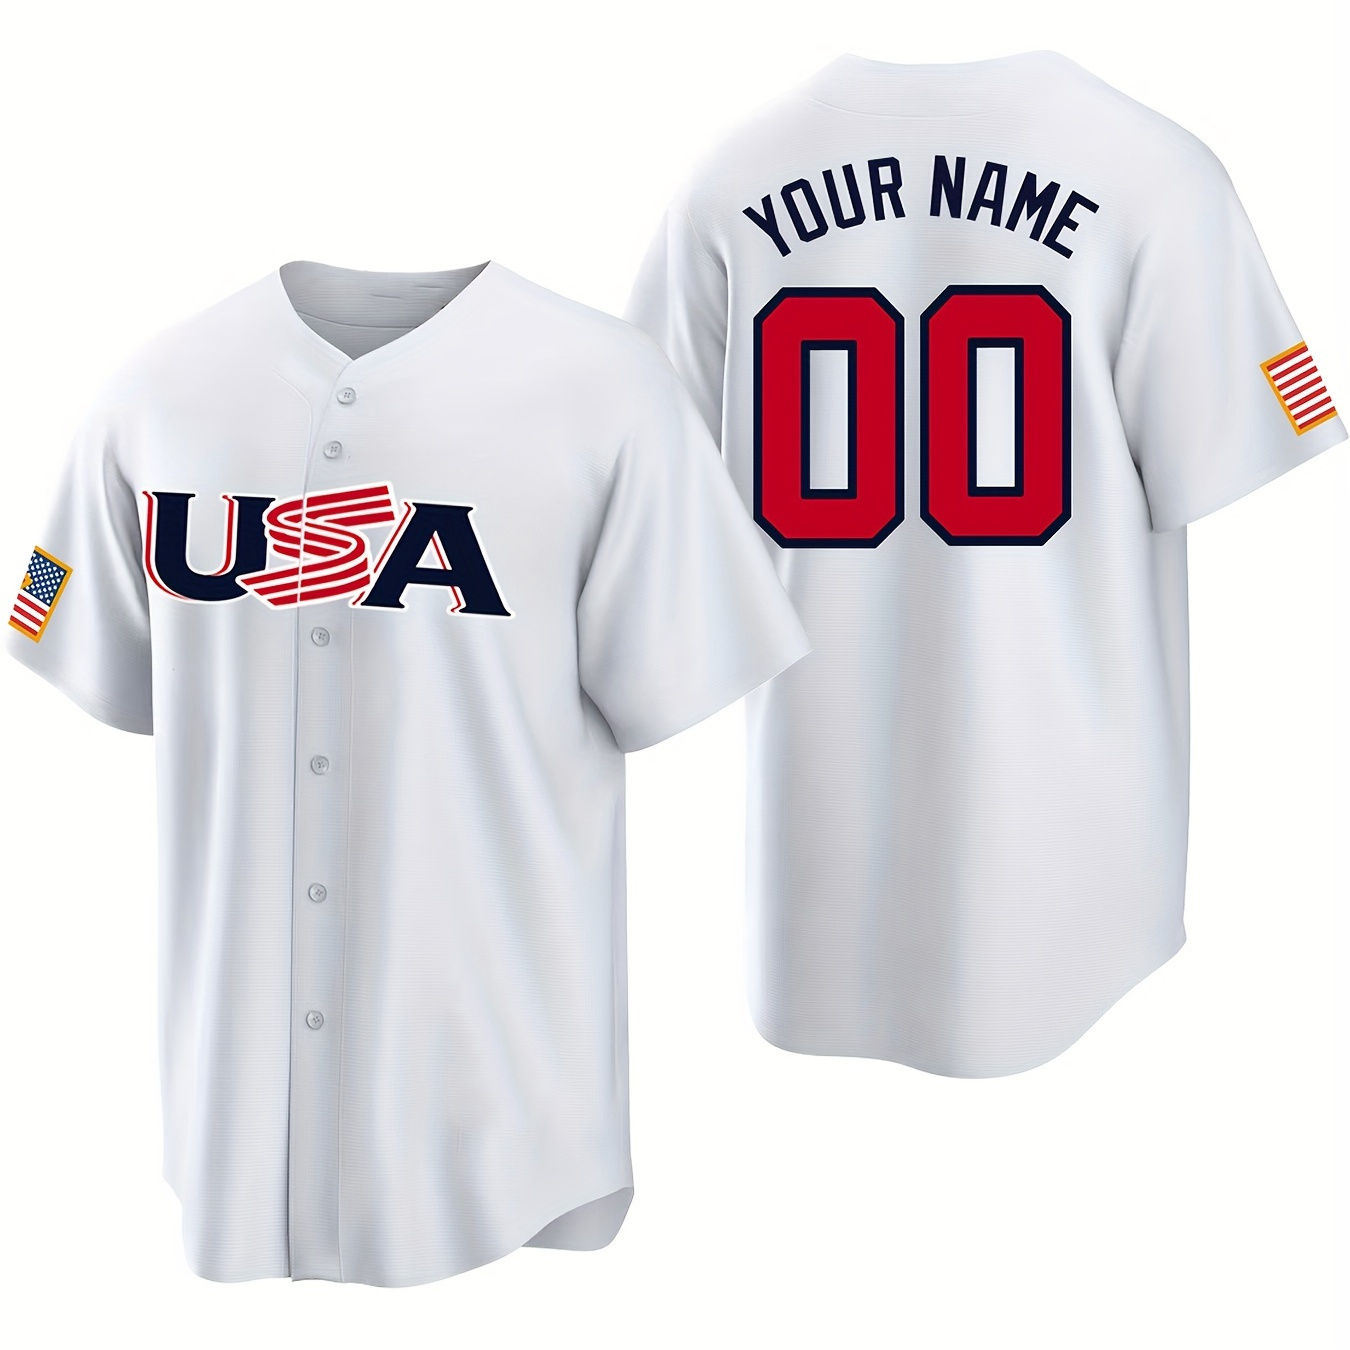 

Men's Personalized Custom Baseball Jersey Shirt, Your Diy Name Numbers & Usa Graphic Print Short Sleeve Button Up Shirt For Competition Party Training